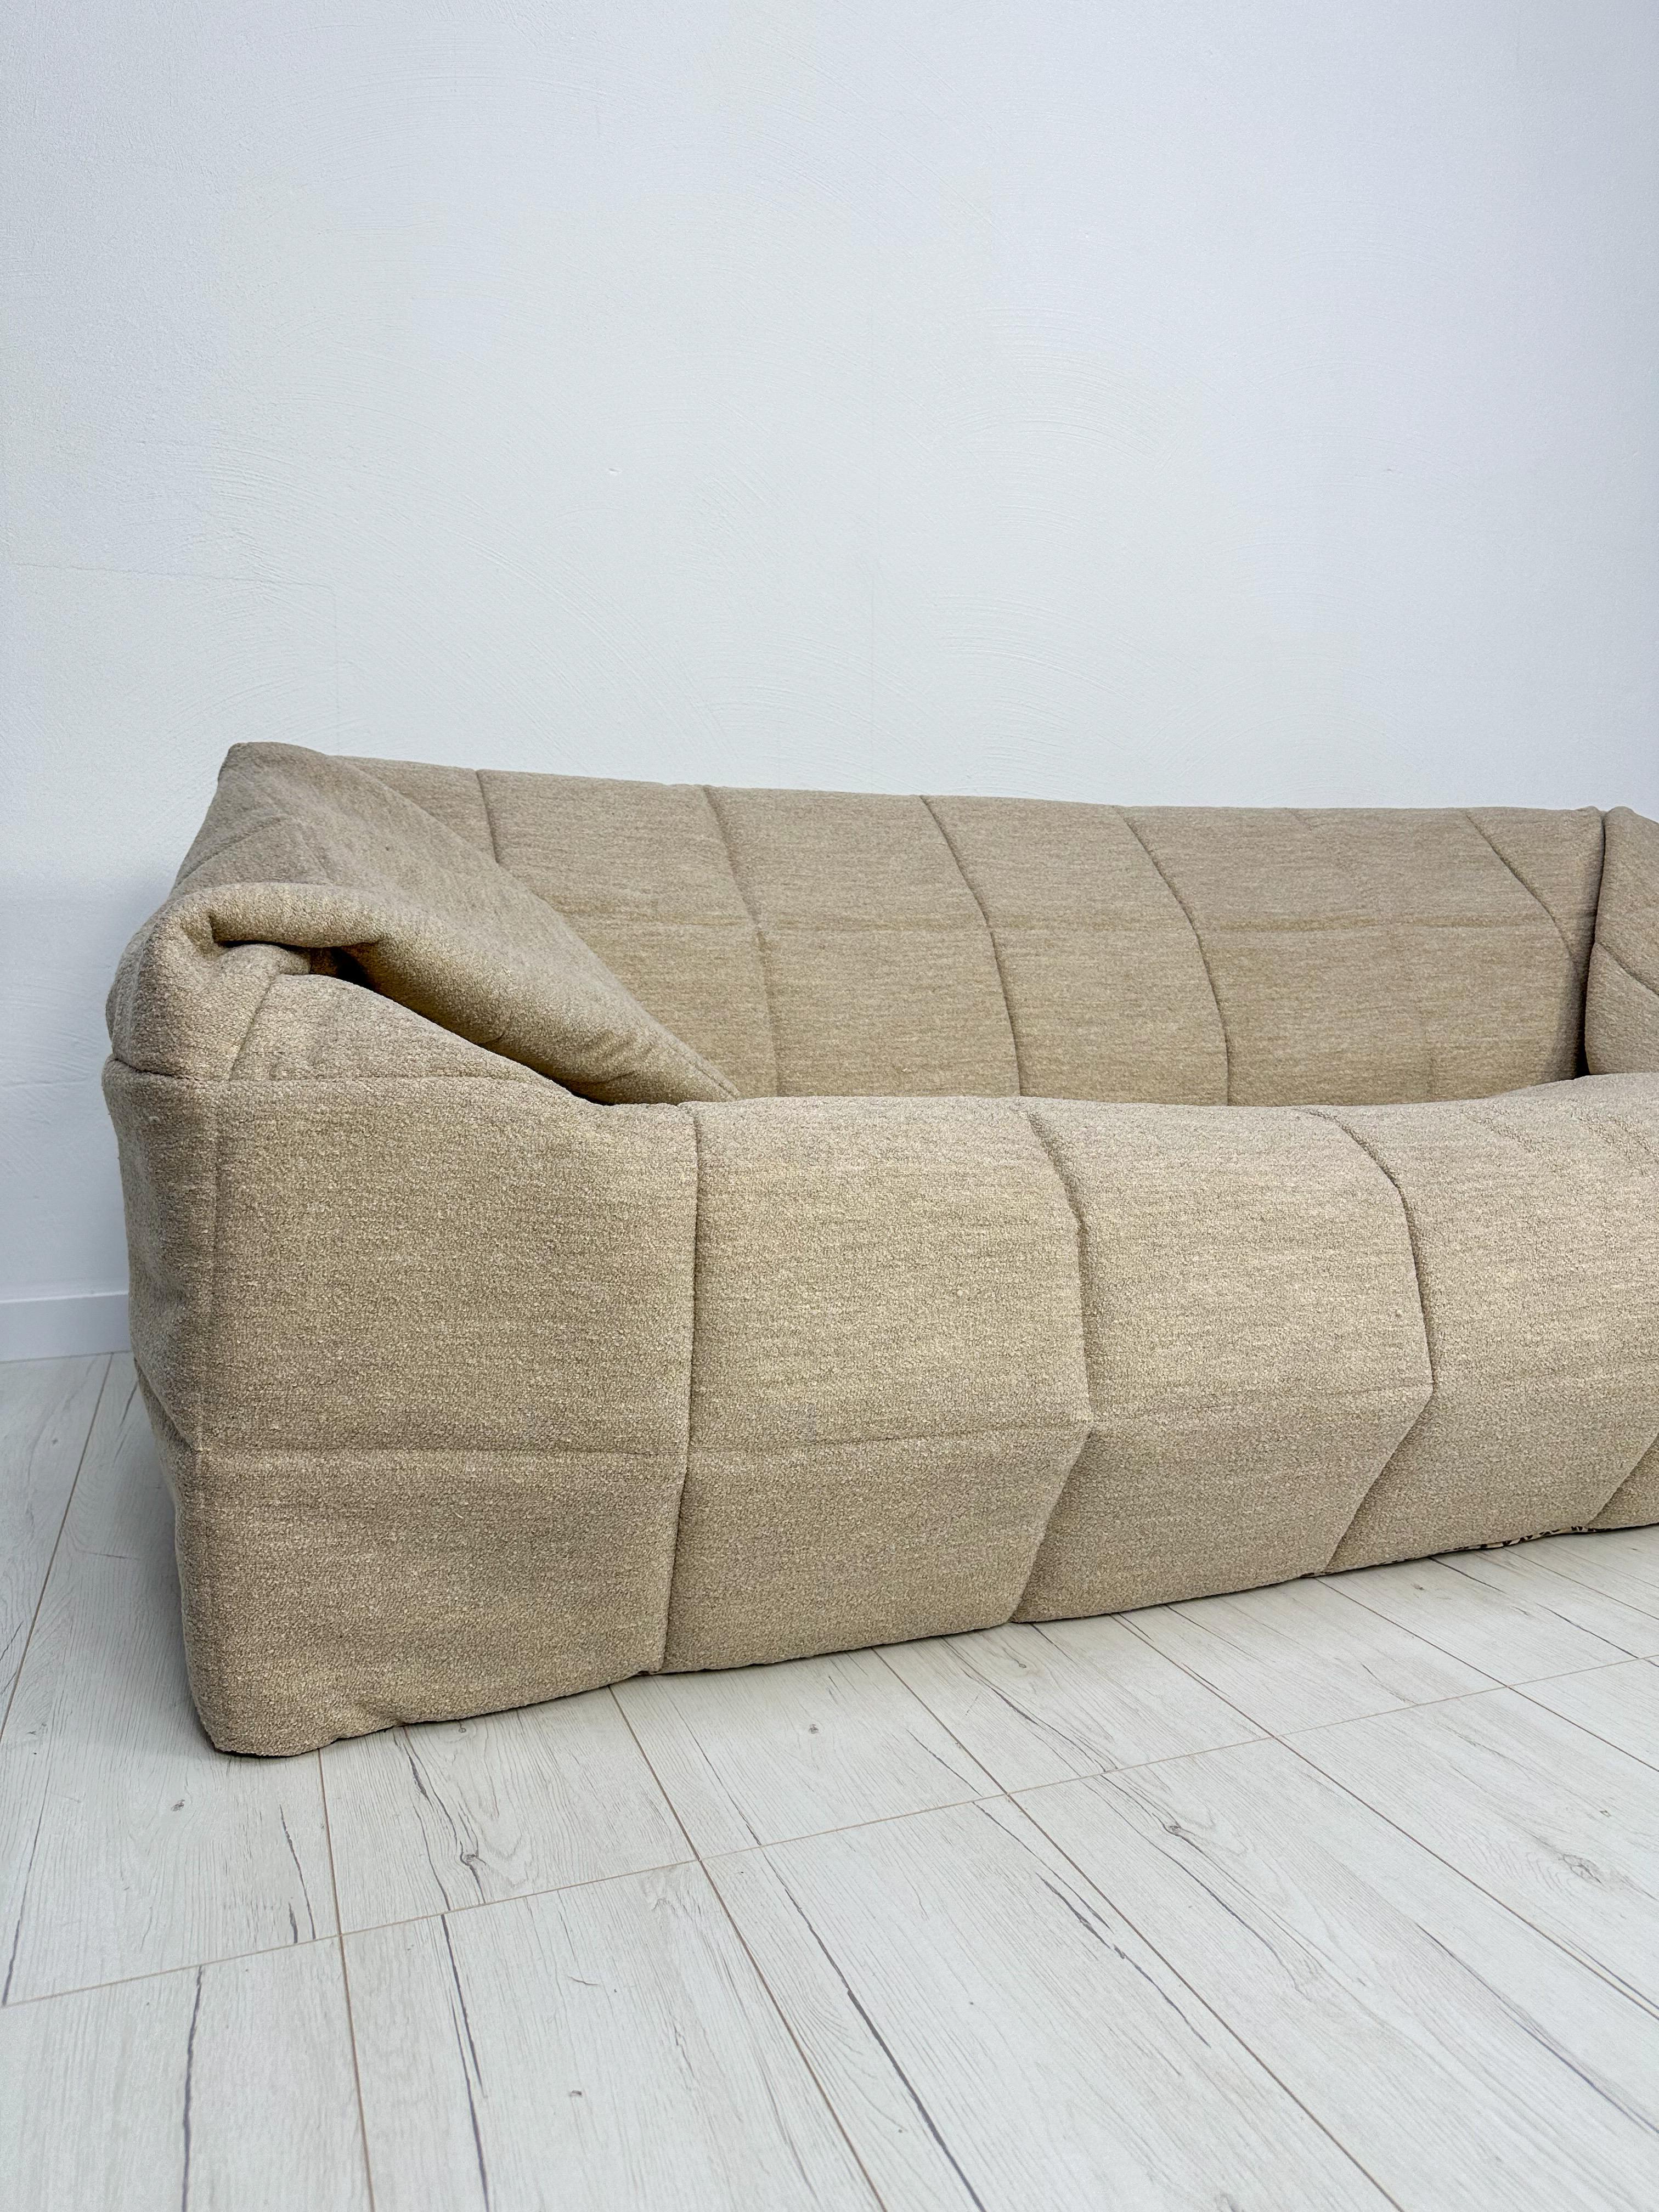 French ORIGINAL 3-SEATER SOFA YUCCA BY MICHEL DUCAROY FOR CINNA, 1980s For Sale